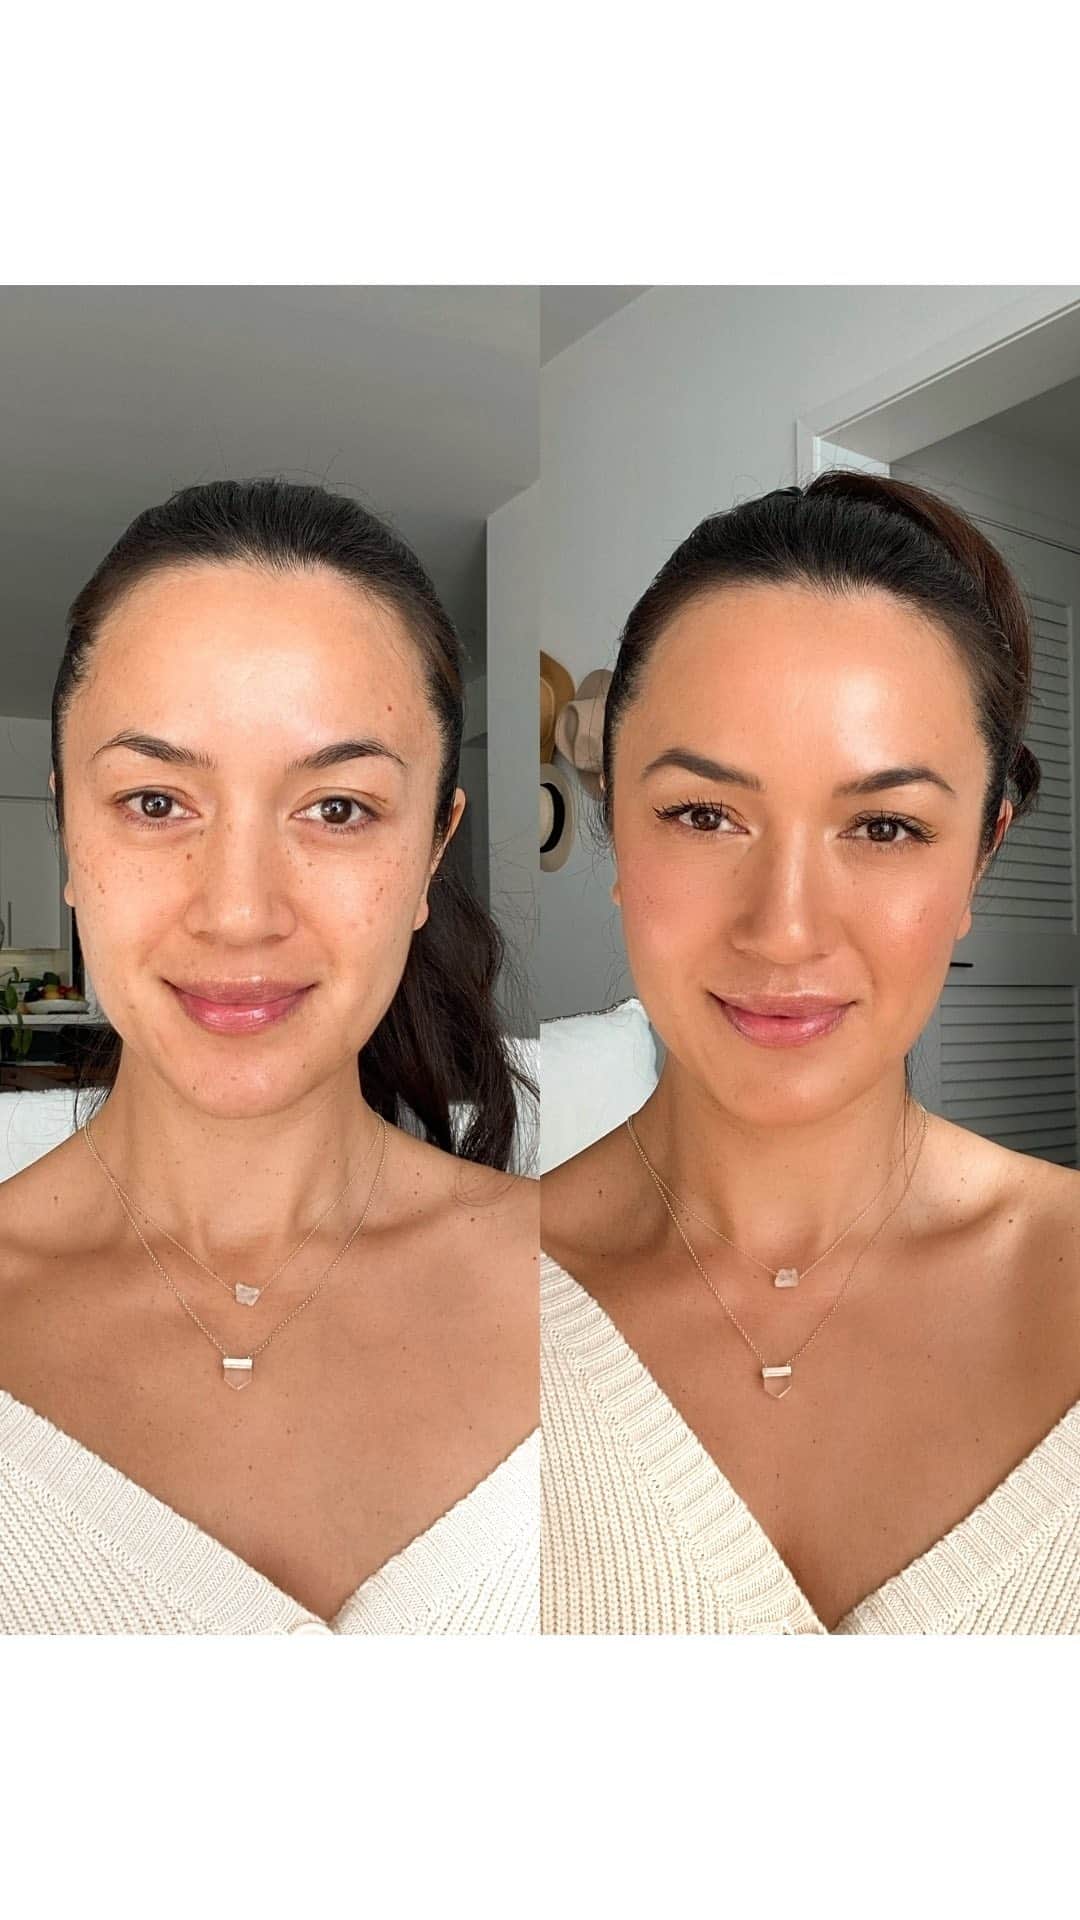 Bianca Cheah Chalmersのインスタグラム：「So before I did my make in this video, I was trialling these new @tula probiotic + prebiotic packed biodegradable Toner Pads. Turns out they’re awesome and I love them — my skin looks a THOUSAND times happier than the day before. So my daily routine goes like this, cleanse, tone, moisturize, then makeup with a natural look. Most days I’ll just wear foundation, and that’s it. Not sure if you can see in the video, but I got a tonne of new freckles from being pregnant. I call them my Olly marks 🥰, since I never got stretch marks. Watch the video to see how I get my final glowy natural look.   I’m using new probiotic + prebiotic skincare by @tula (get 15% off with my code BIANCAMAYCHEAH with link: https://bit.ly/3mX7B1u)  - Cult Classic Cleanser - Toner Pads (this product will change your skincare game. Balances the skin and tightens the pores) - D+N moisturising cream  And for the makeup, I used all my old stuff, so... - foundation - concealer  - blush  - natural eyeshadow and brow palette  - mascara - lip treatment   #tulapartner #embraceyourskin」